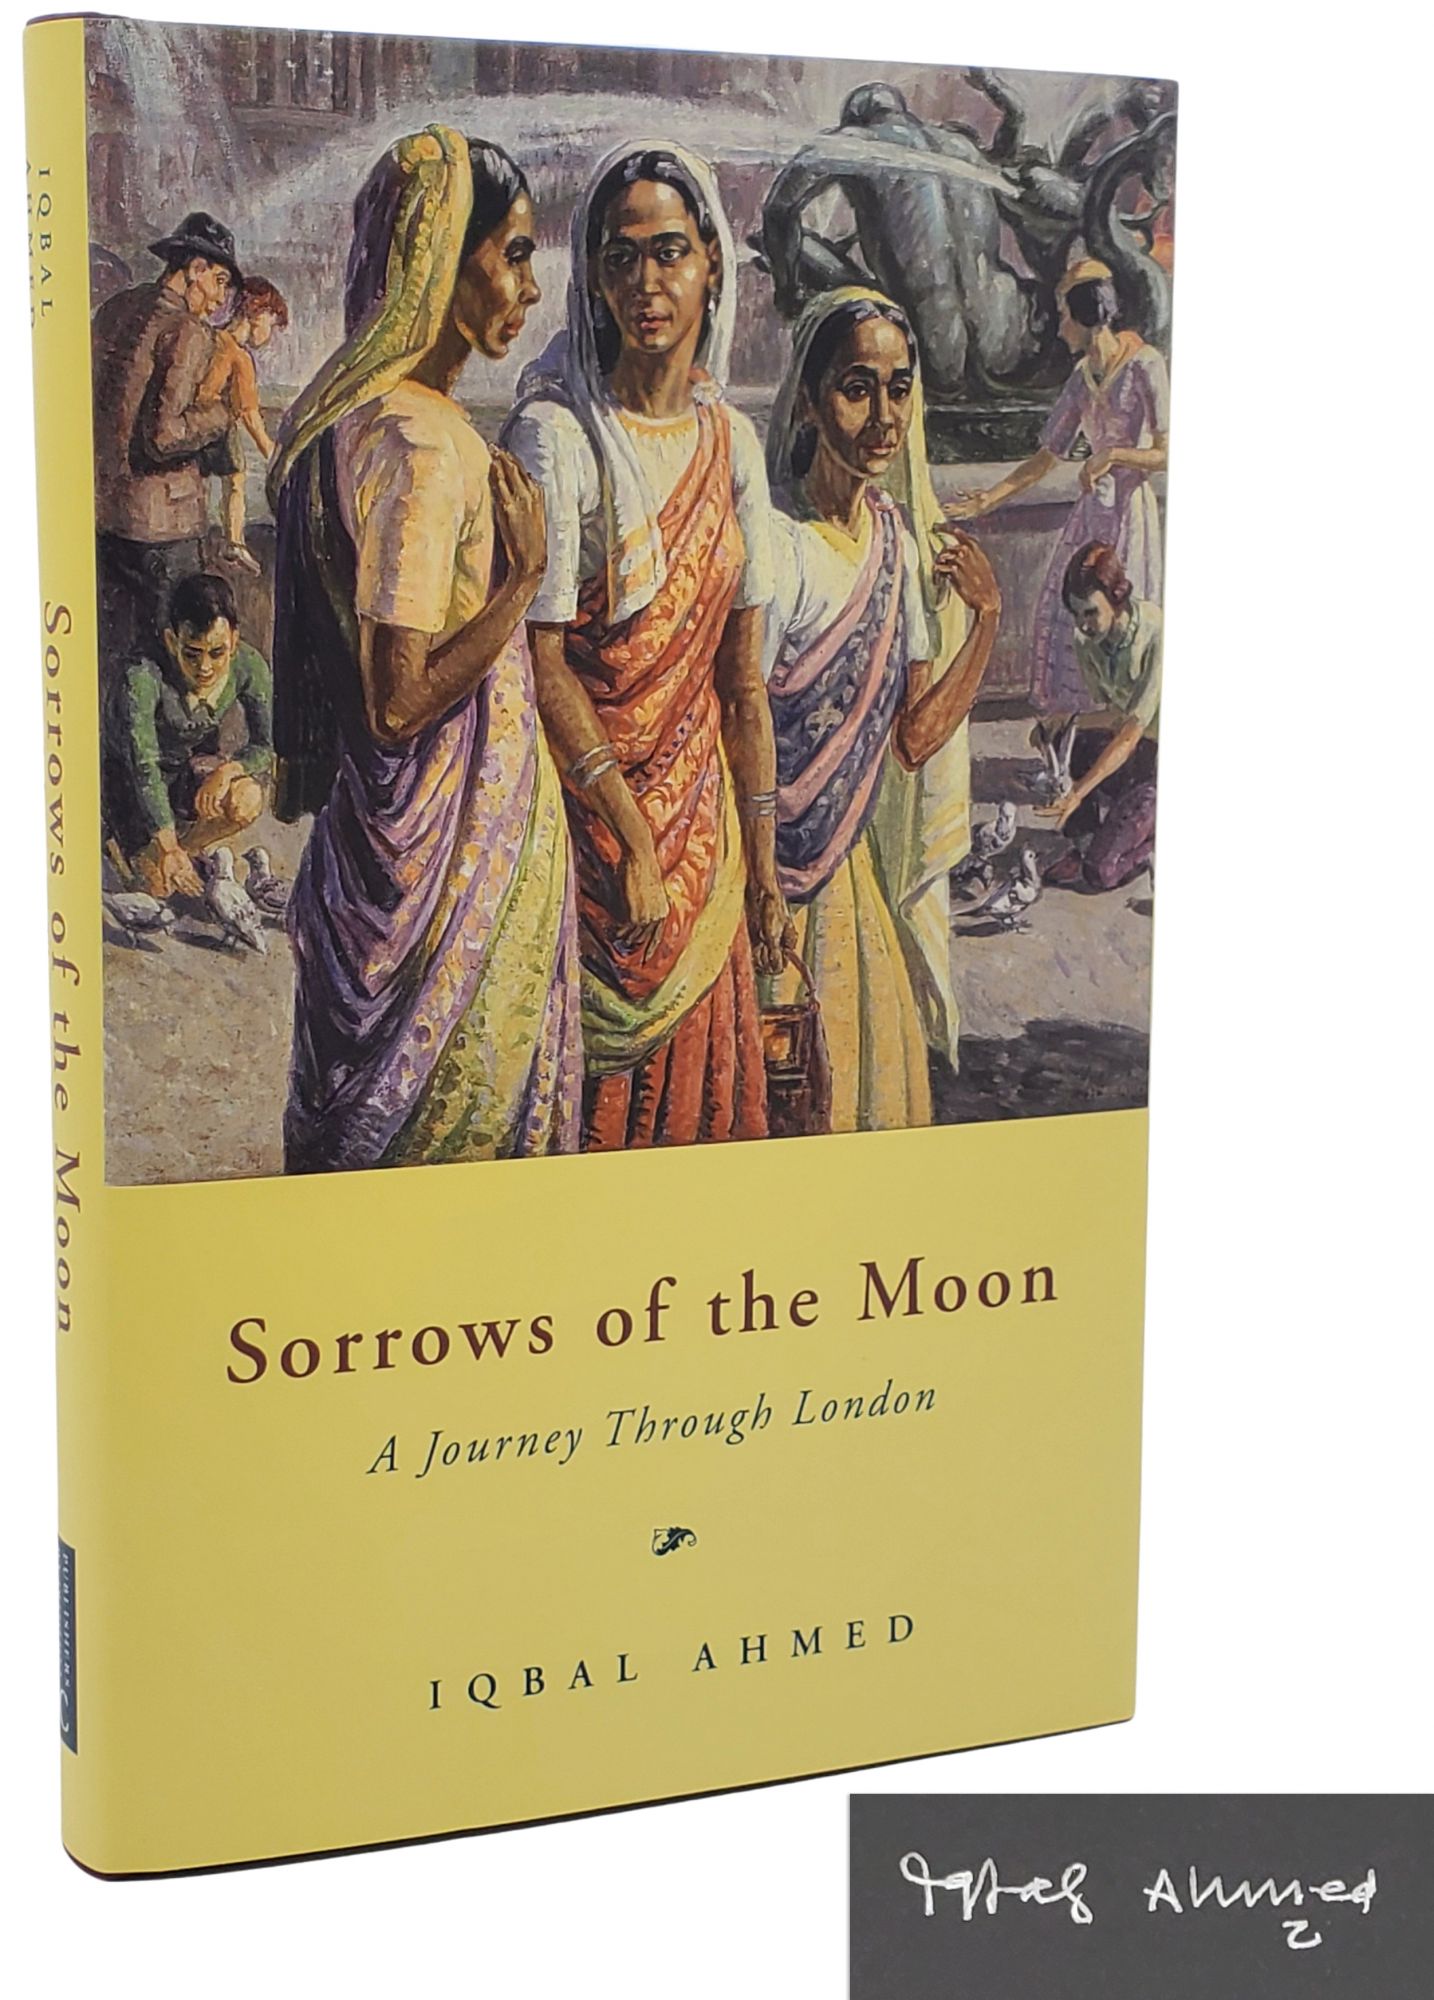 [Book #23214] SORROWS OF THE MOON. A Journey Through London. Iqbal Ahmed.